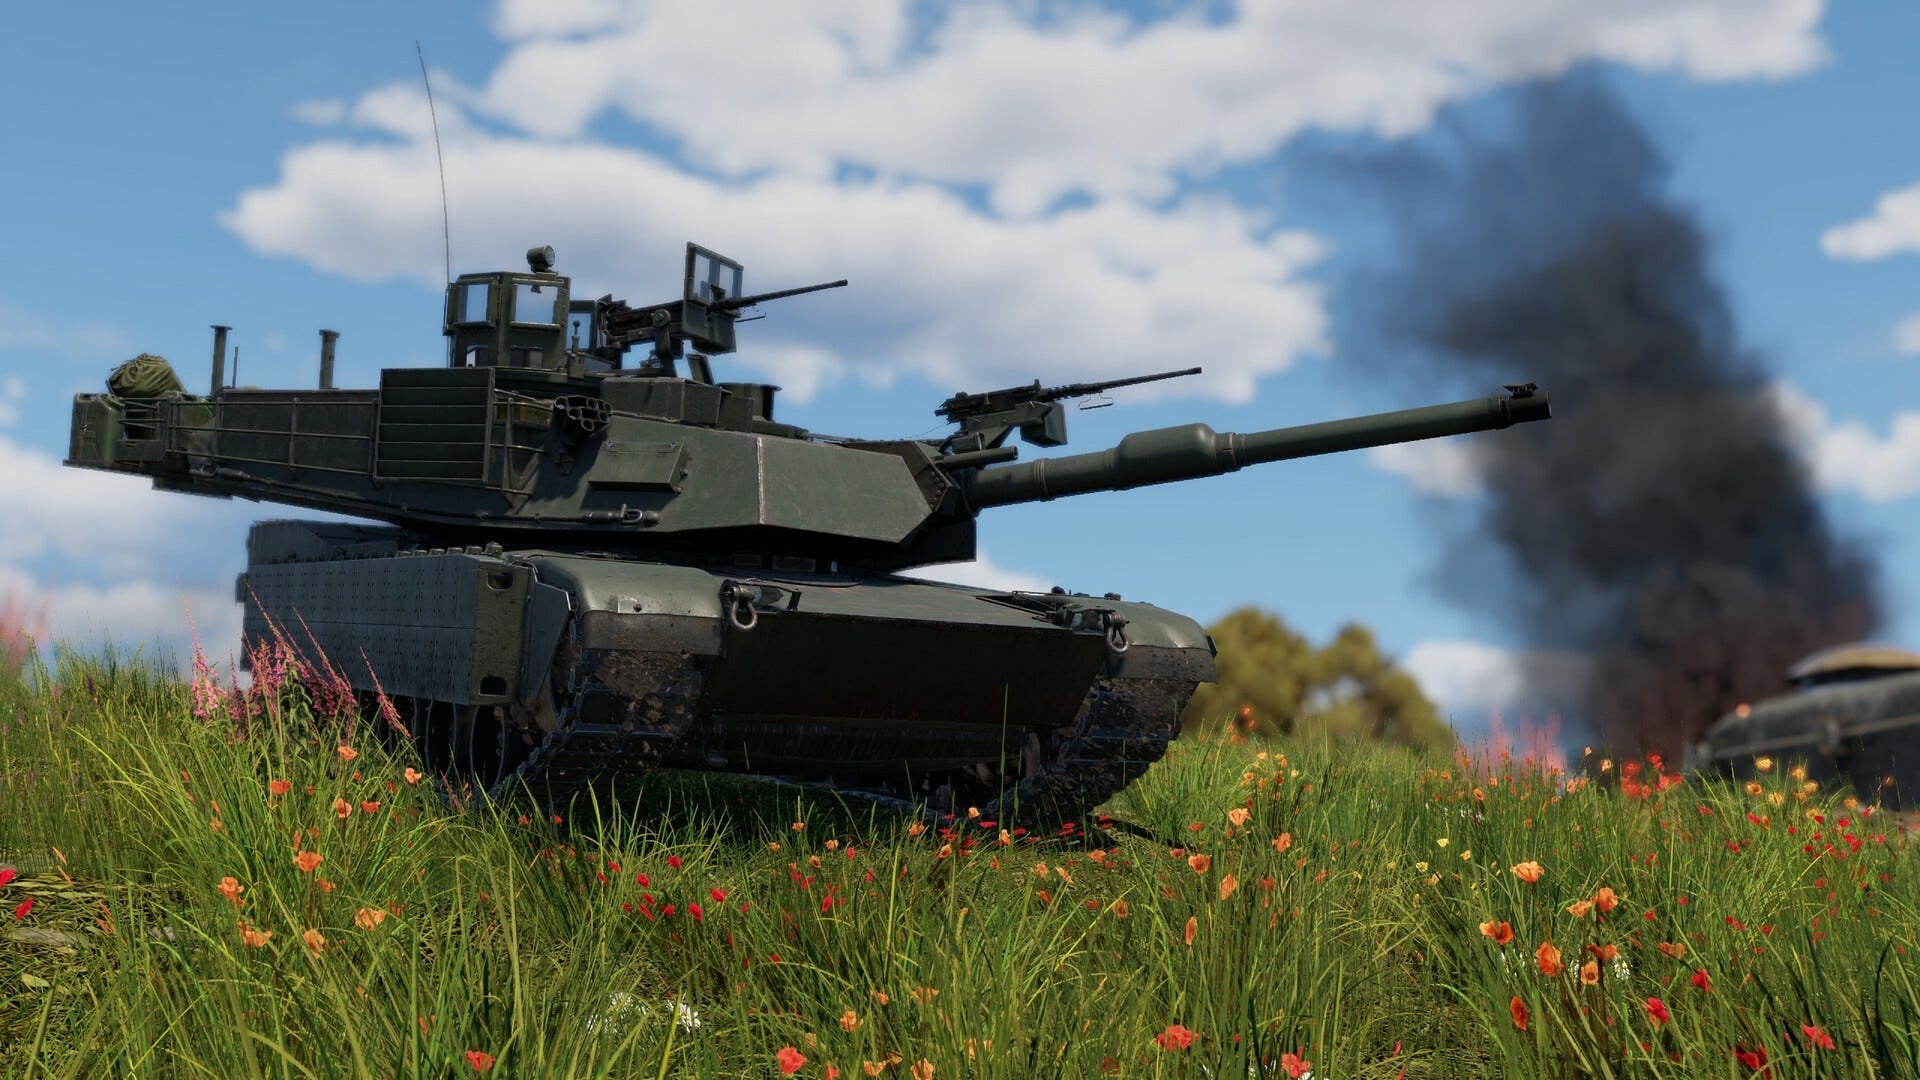 War Thunder players leak military documents on forums, again